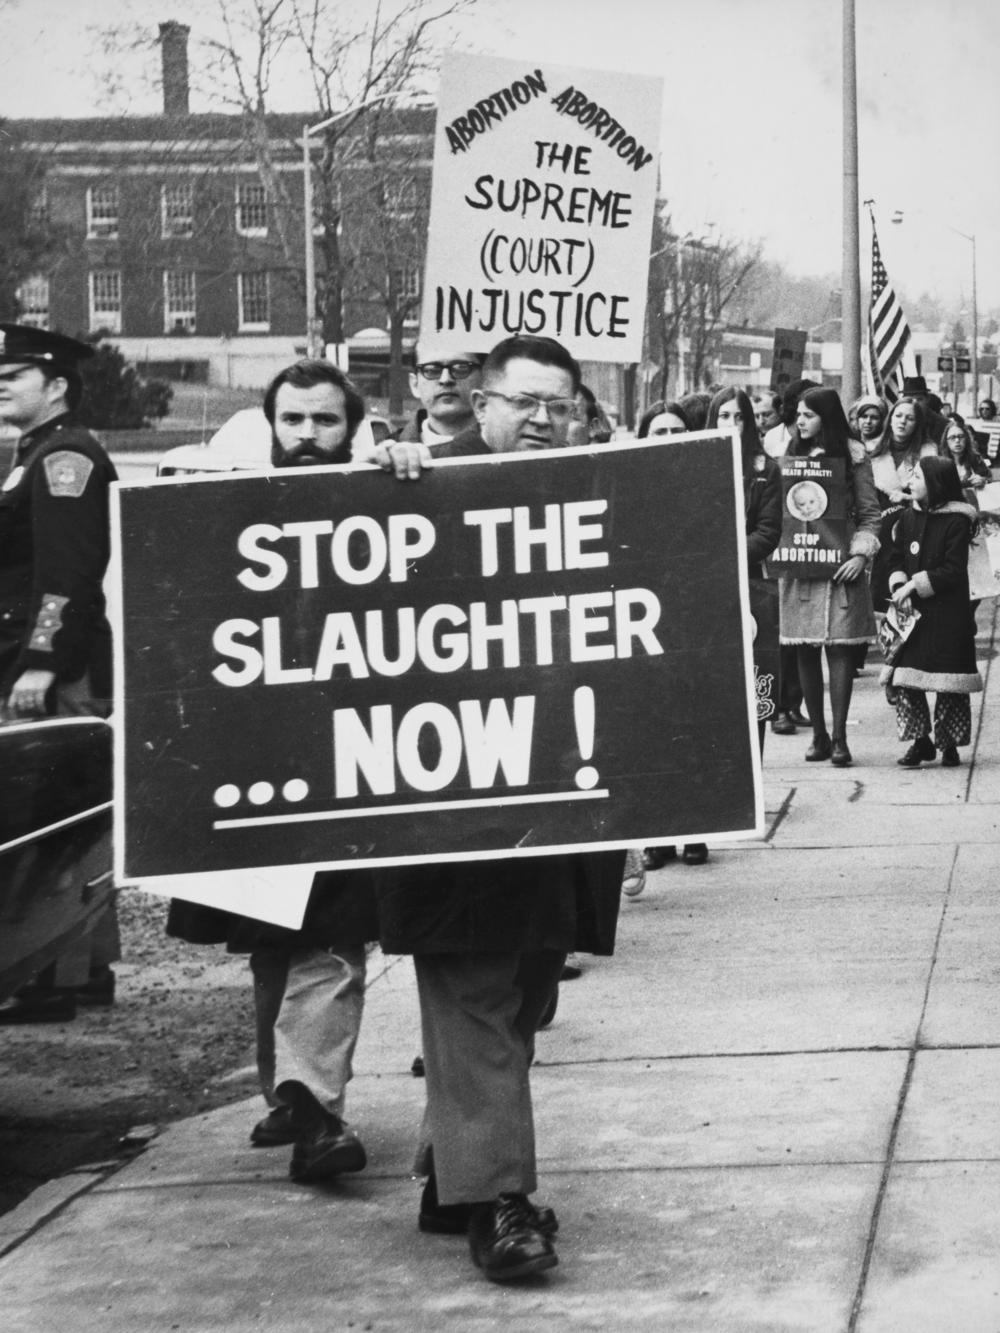 Members of a Right to Life committee holding a banner reading 'Stop the slaughter now!' and a placard reading 'The Supreme Court Injustice' during a protest, location unspecified, 1974.